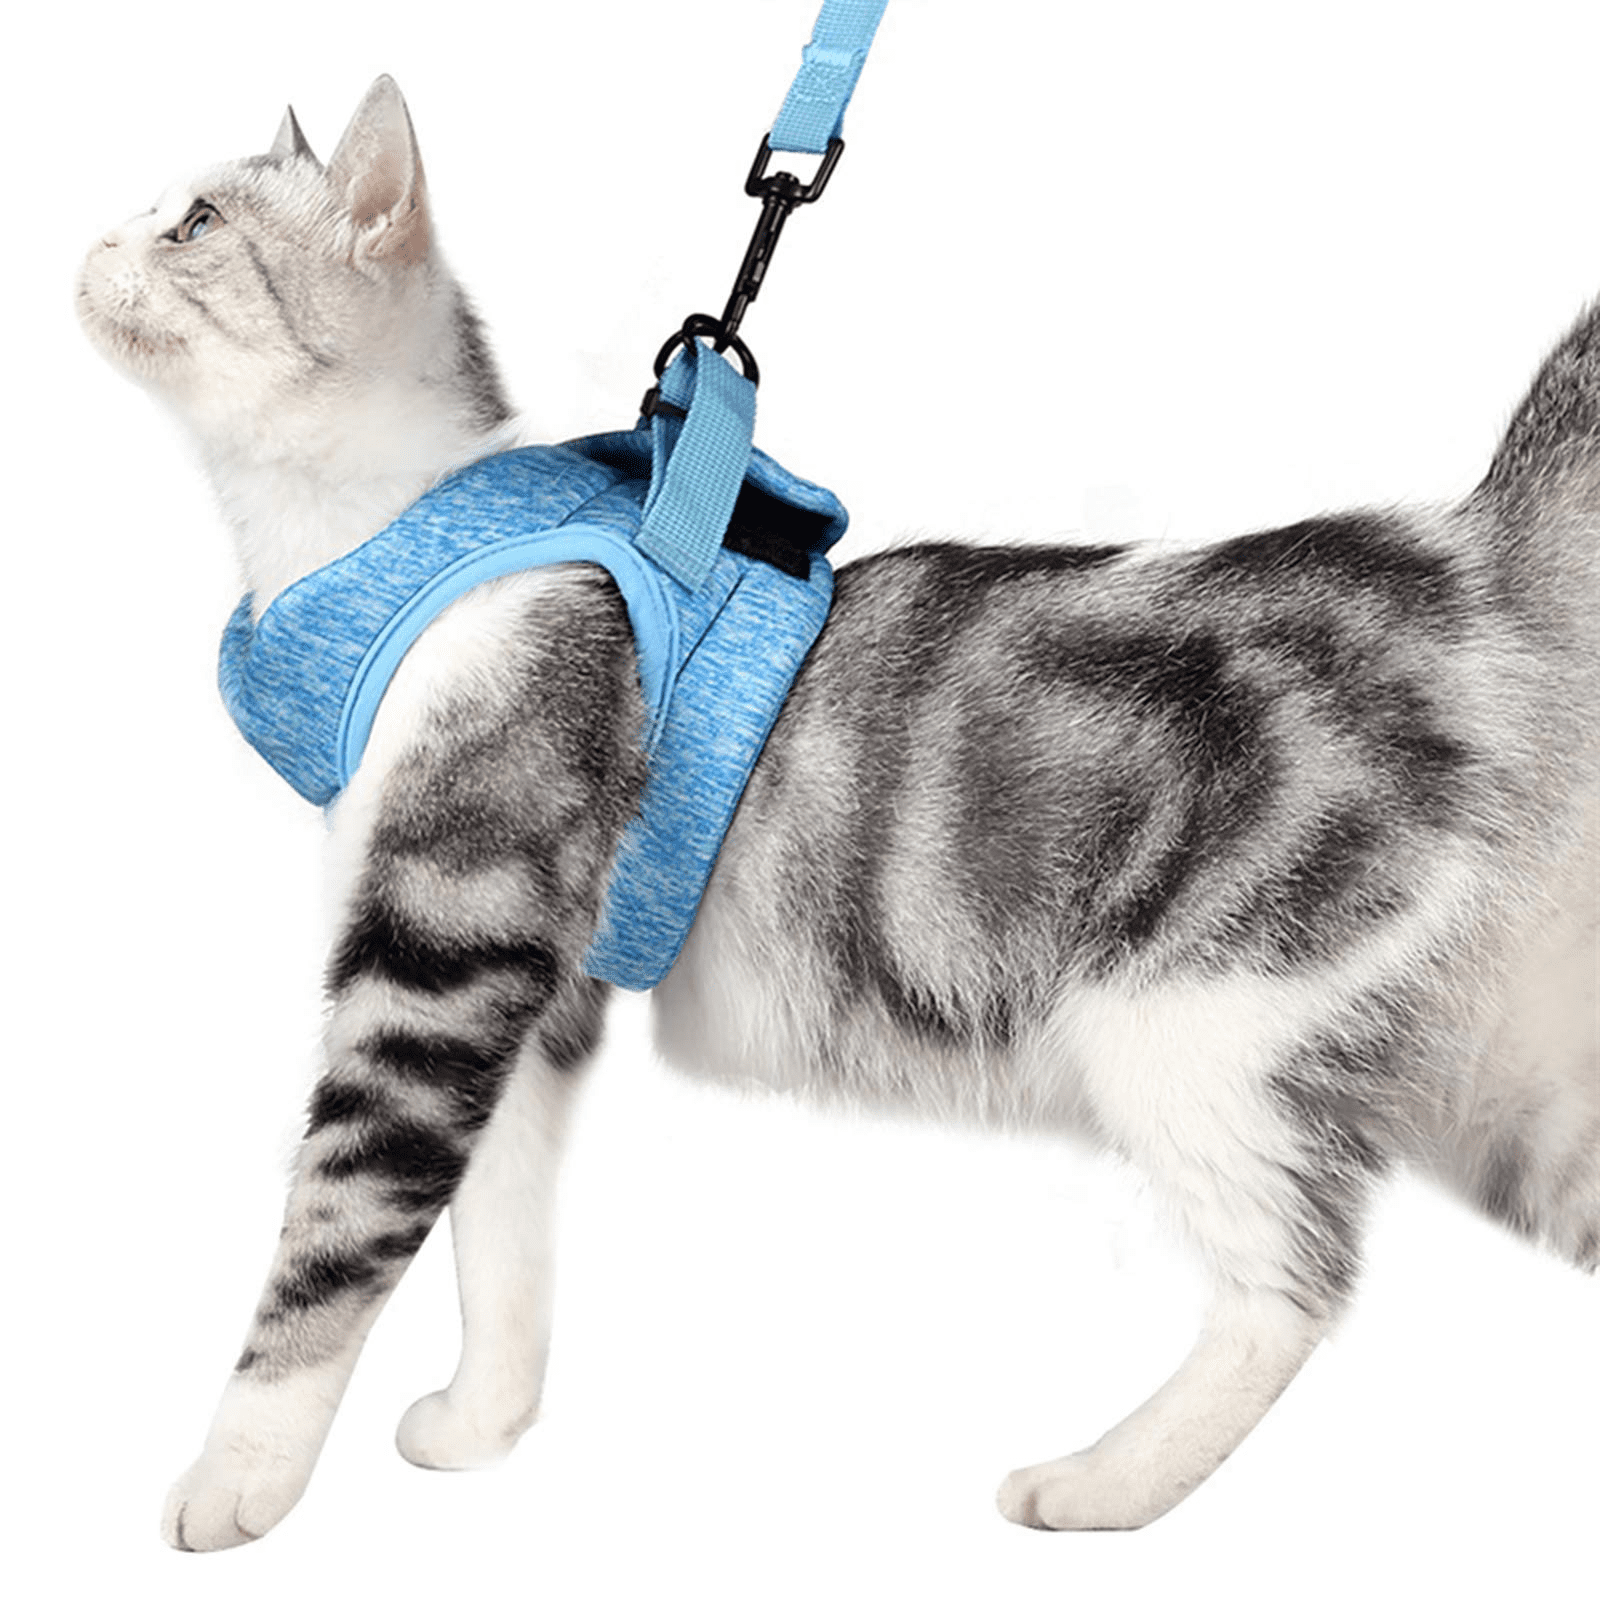 Rabbit Kitten Harness Cat Leash for Small Animal Adjustable Soft Harness and Lead Set for Bunny Cat Little Pet Walking 